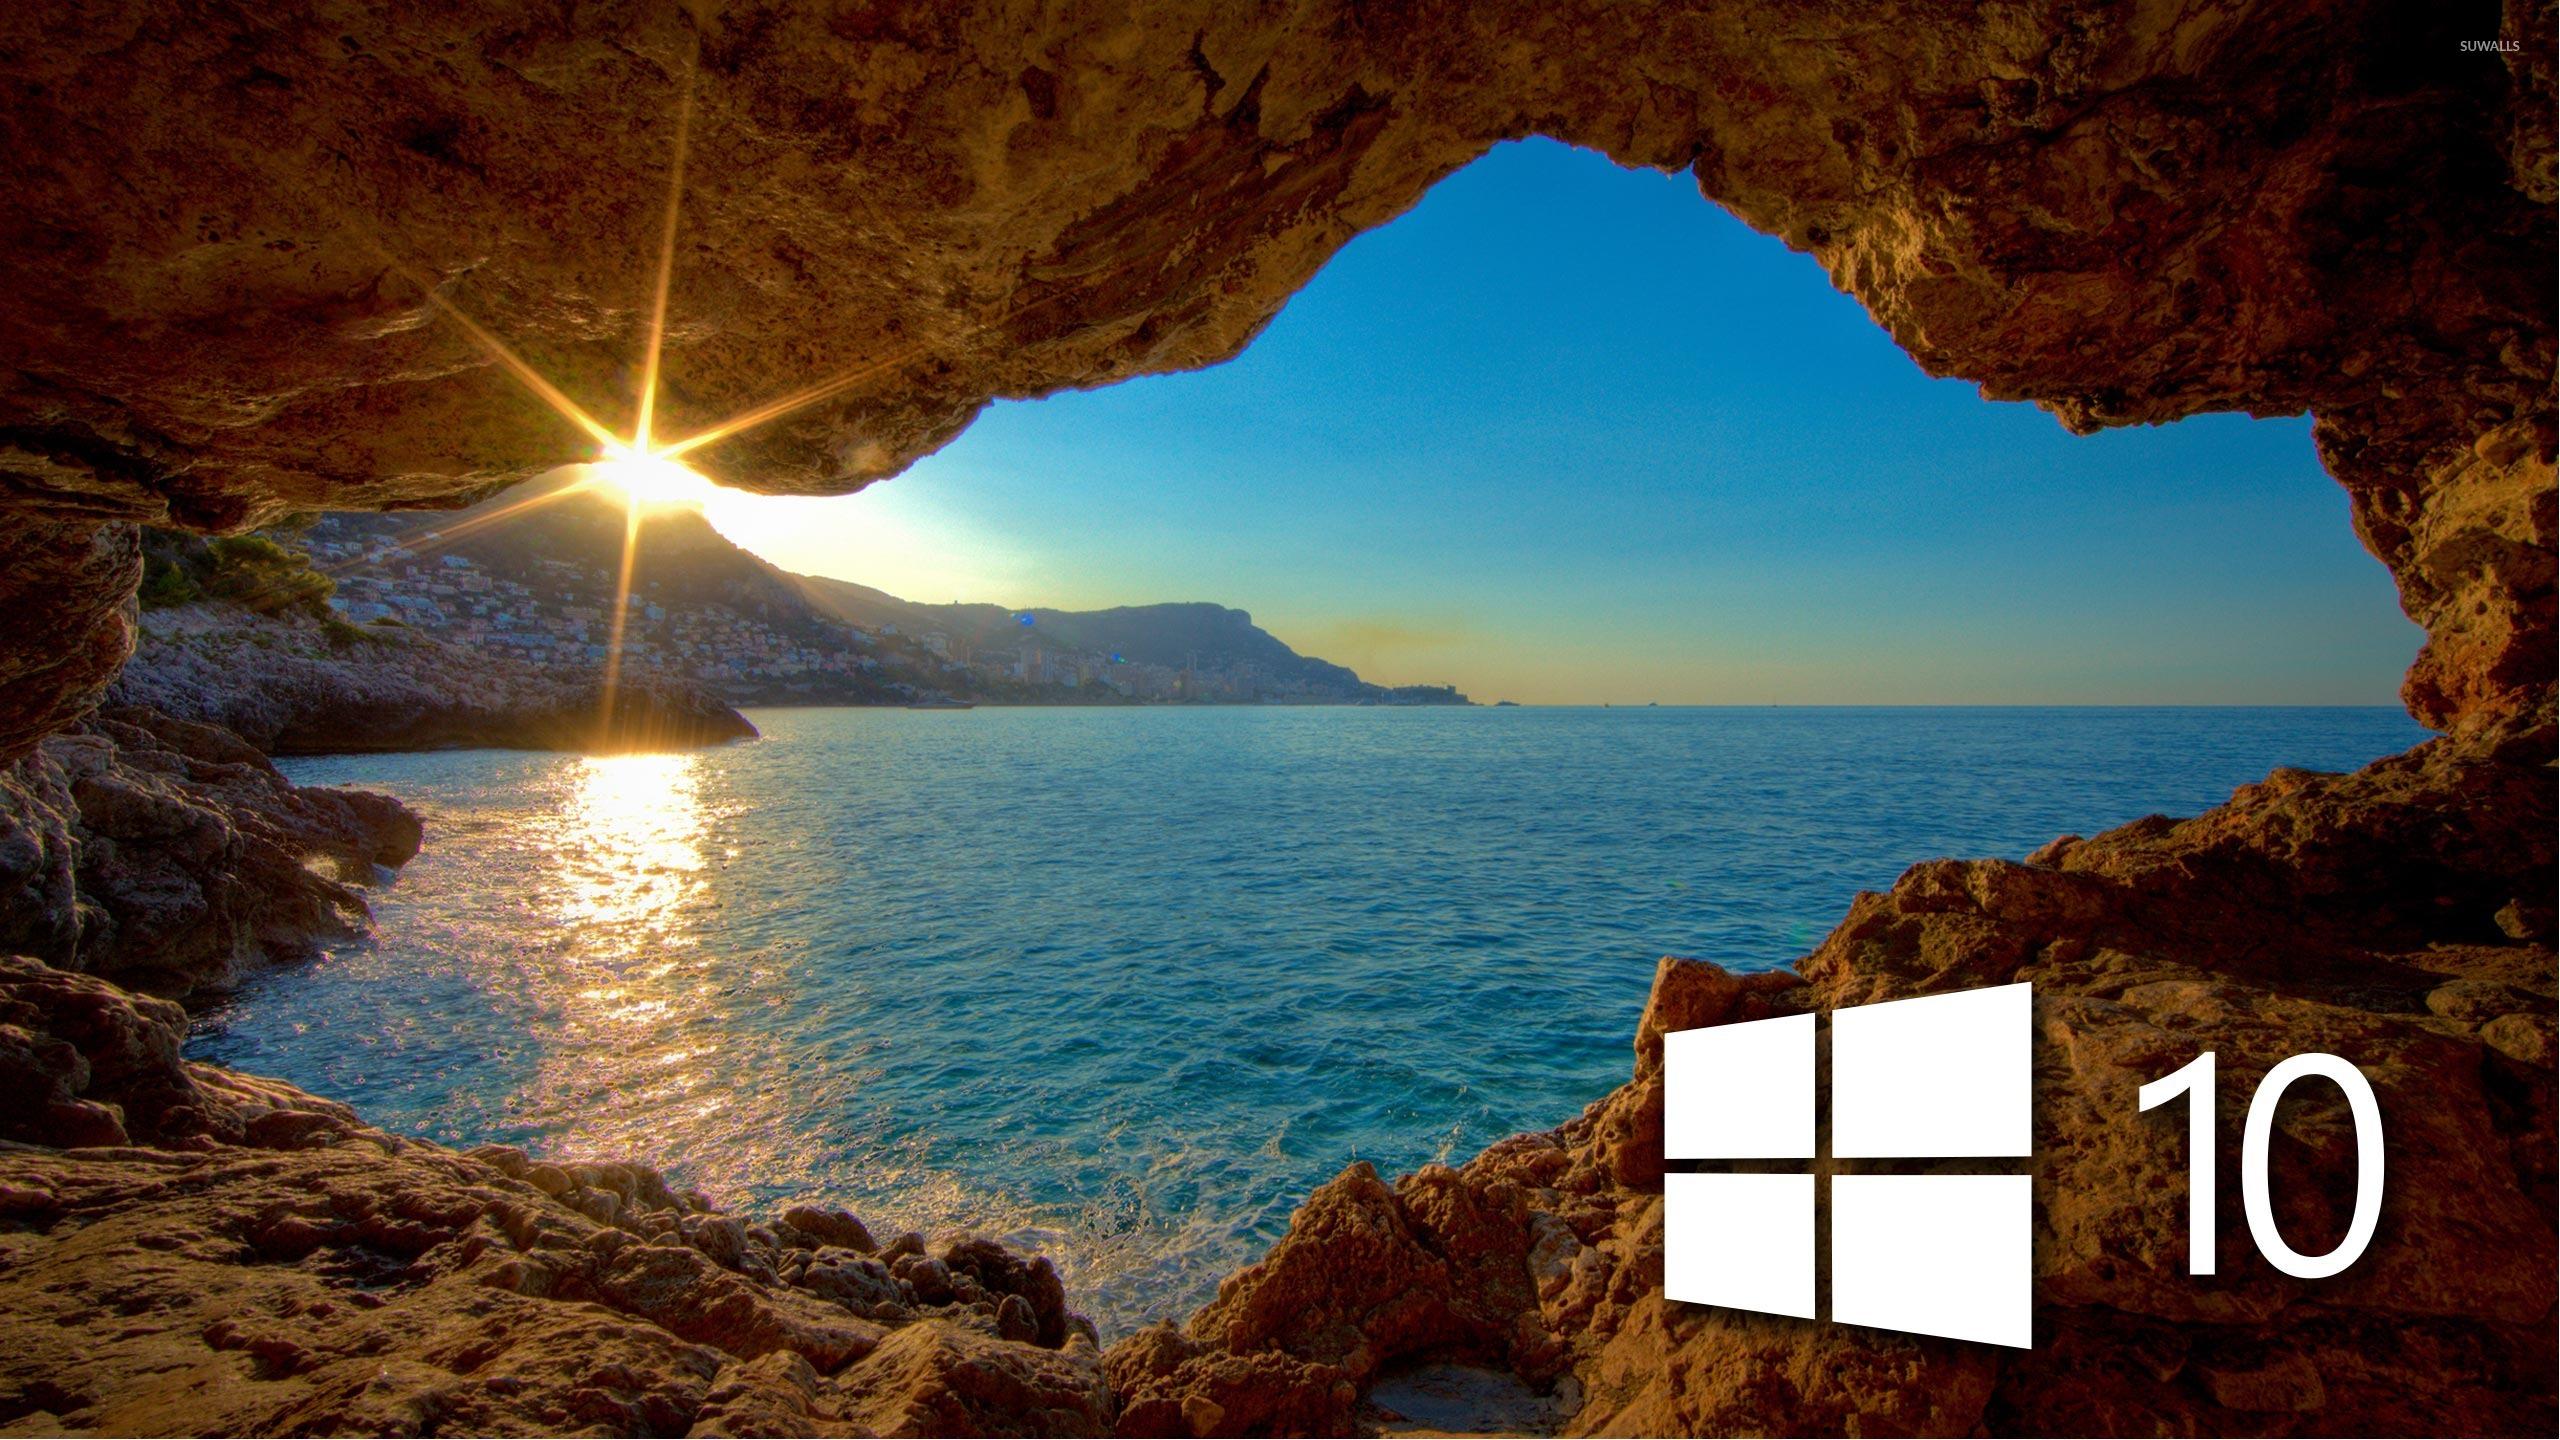 2560 x 1440 · jpeg - Windows 10 over the cave simple logo wallpaper - Computer wallpapers ...